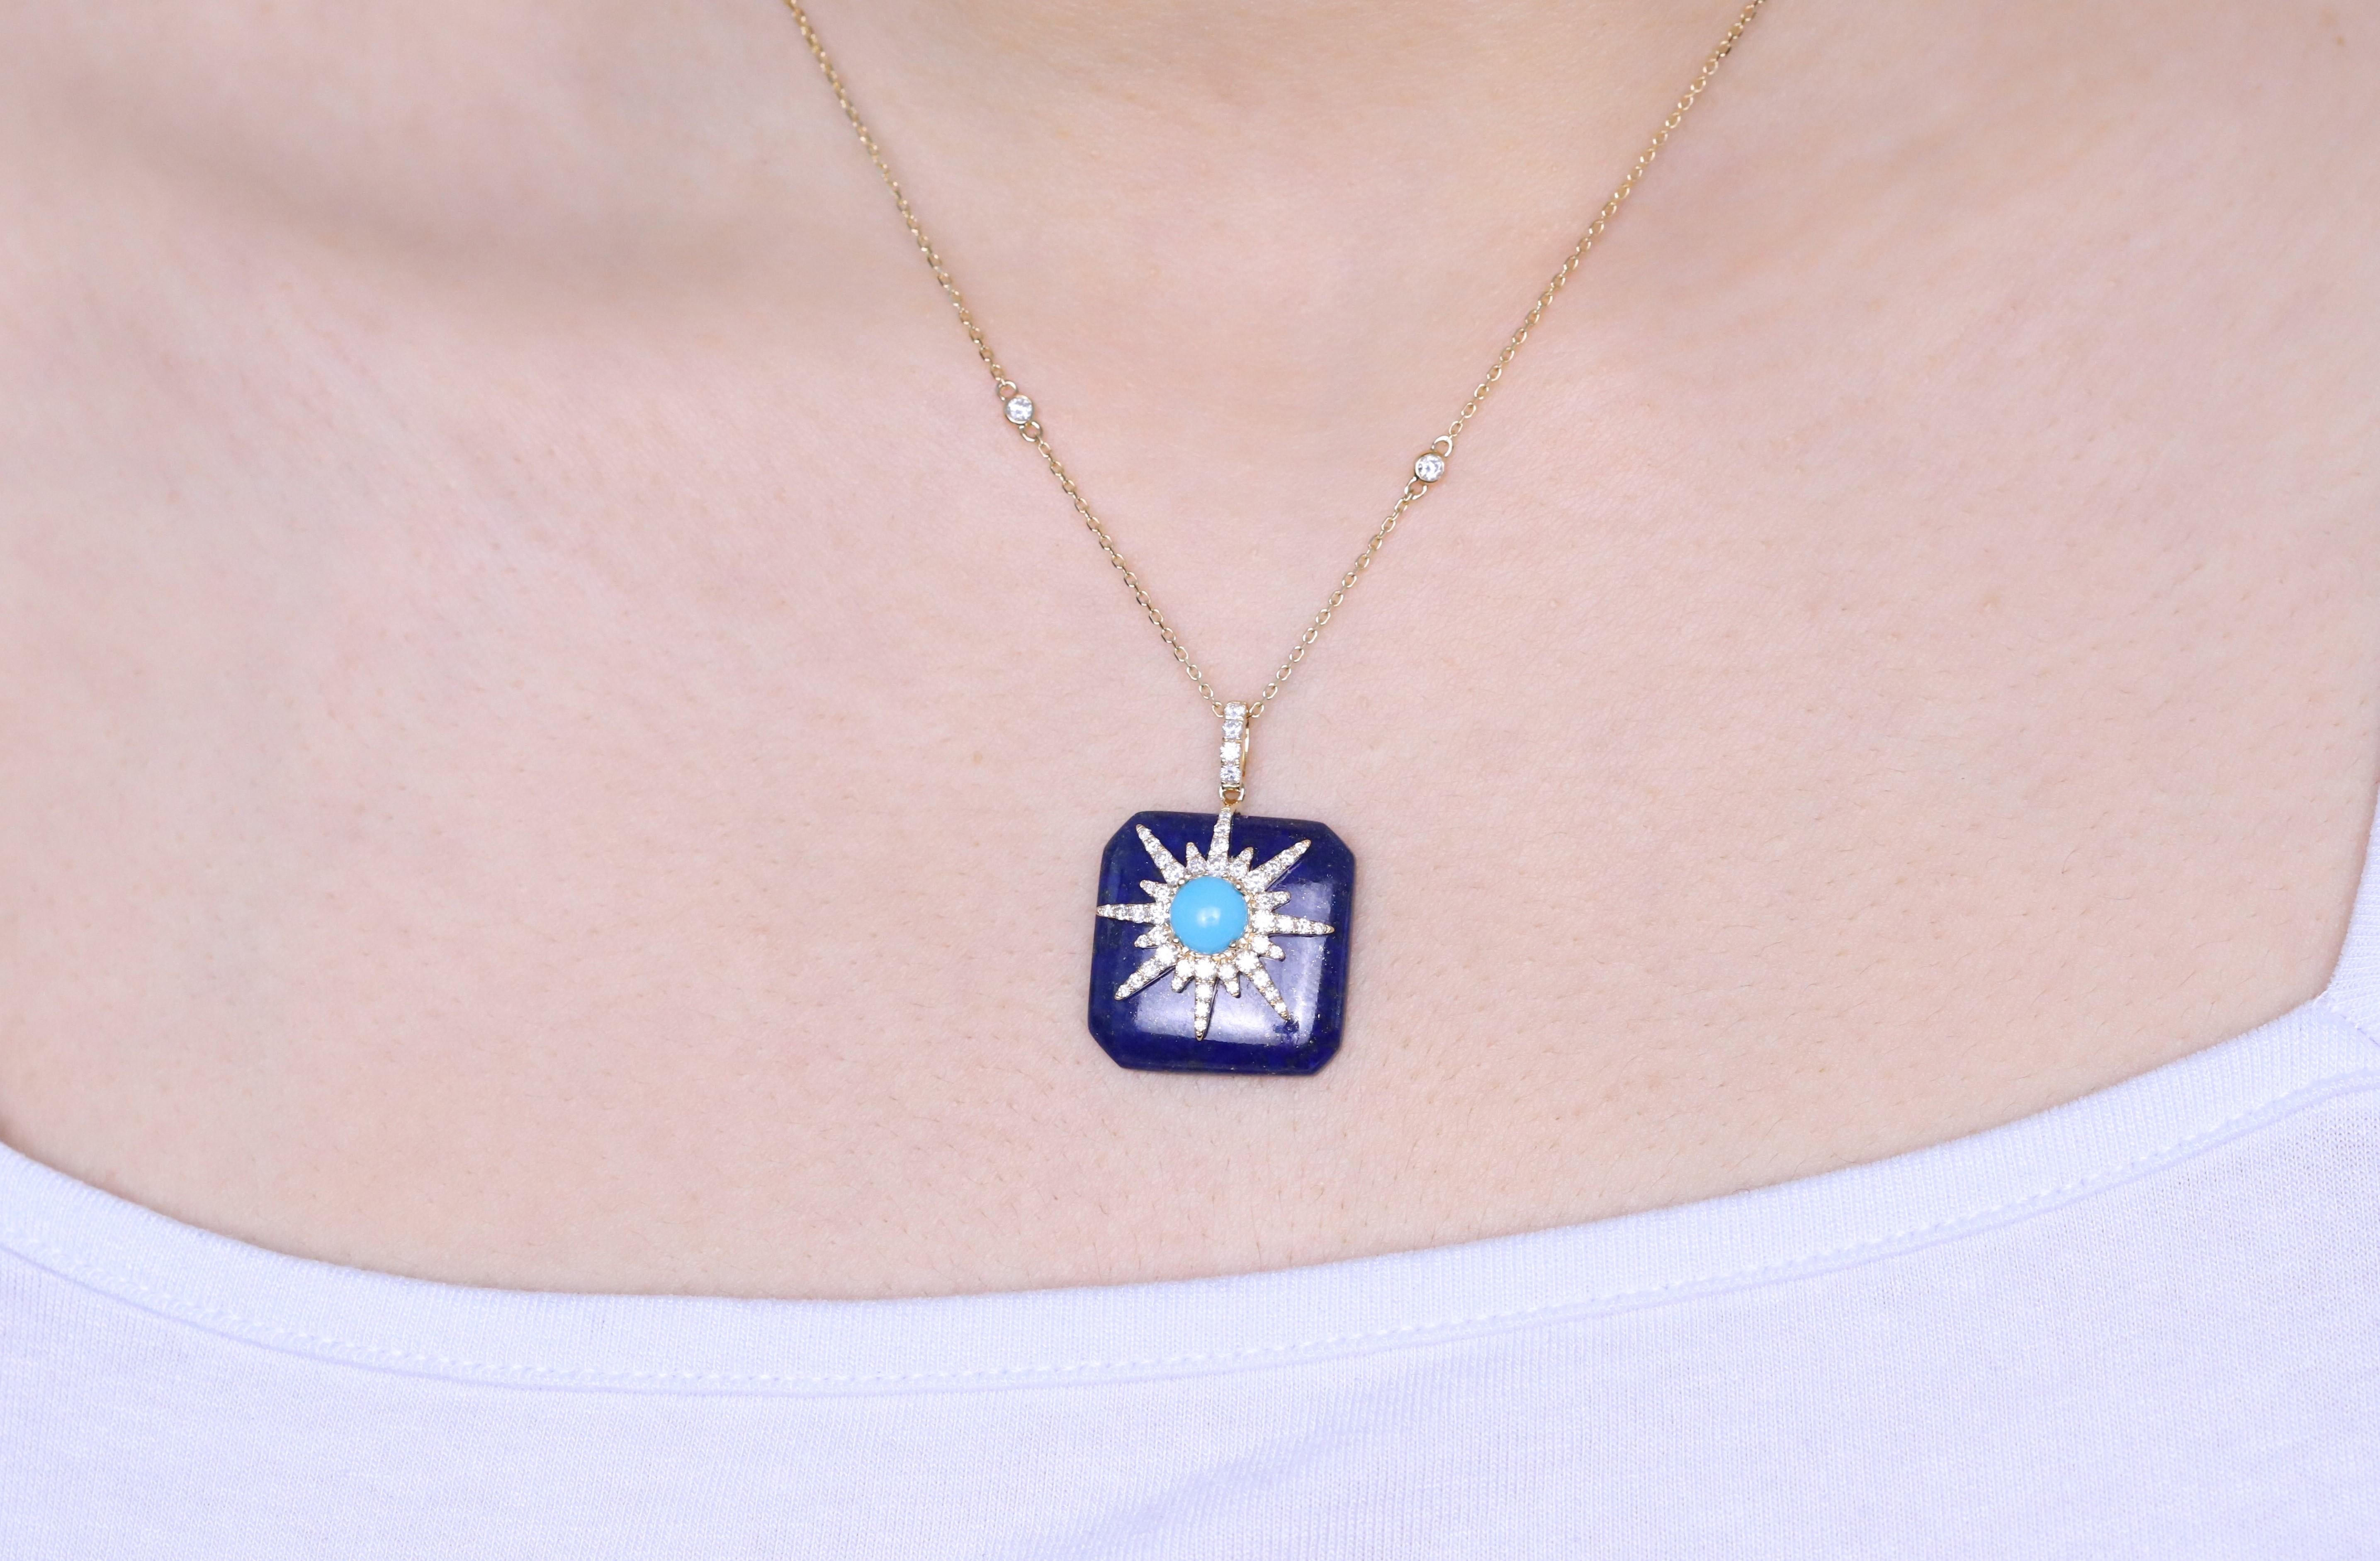 Decorate yourself in elegance with this Pendant is crafted from 14-karat Yellow Gold by Gin & Grace. This Pendant is made up of Round-Cab Turquoise (1 pcs) 0.87 carat, Free Size Lapis (1pc) 19.54 carat and Round-cut White Diamond (54 Pcs) 0.62